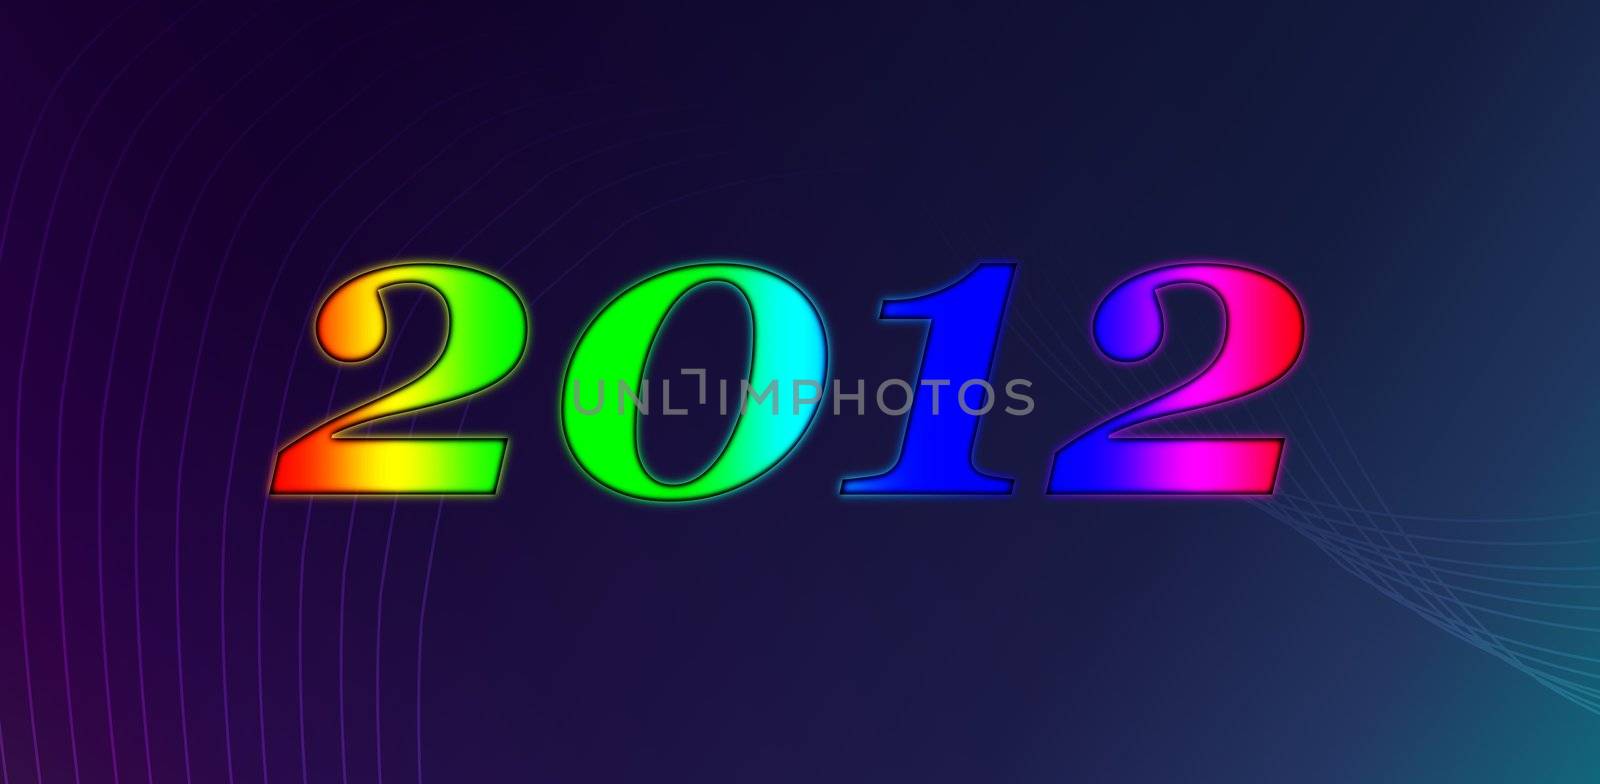 2012 Happy New Year number on dark background with lines.